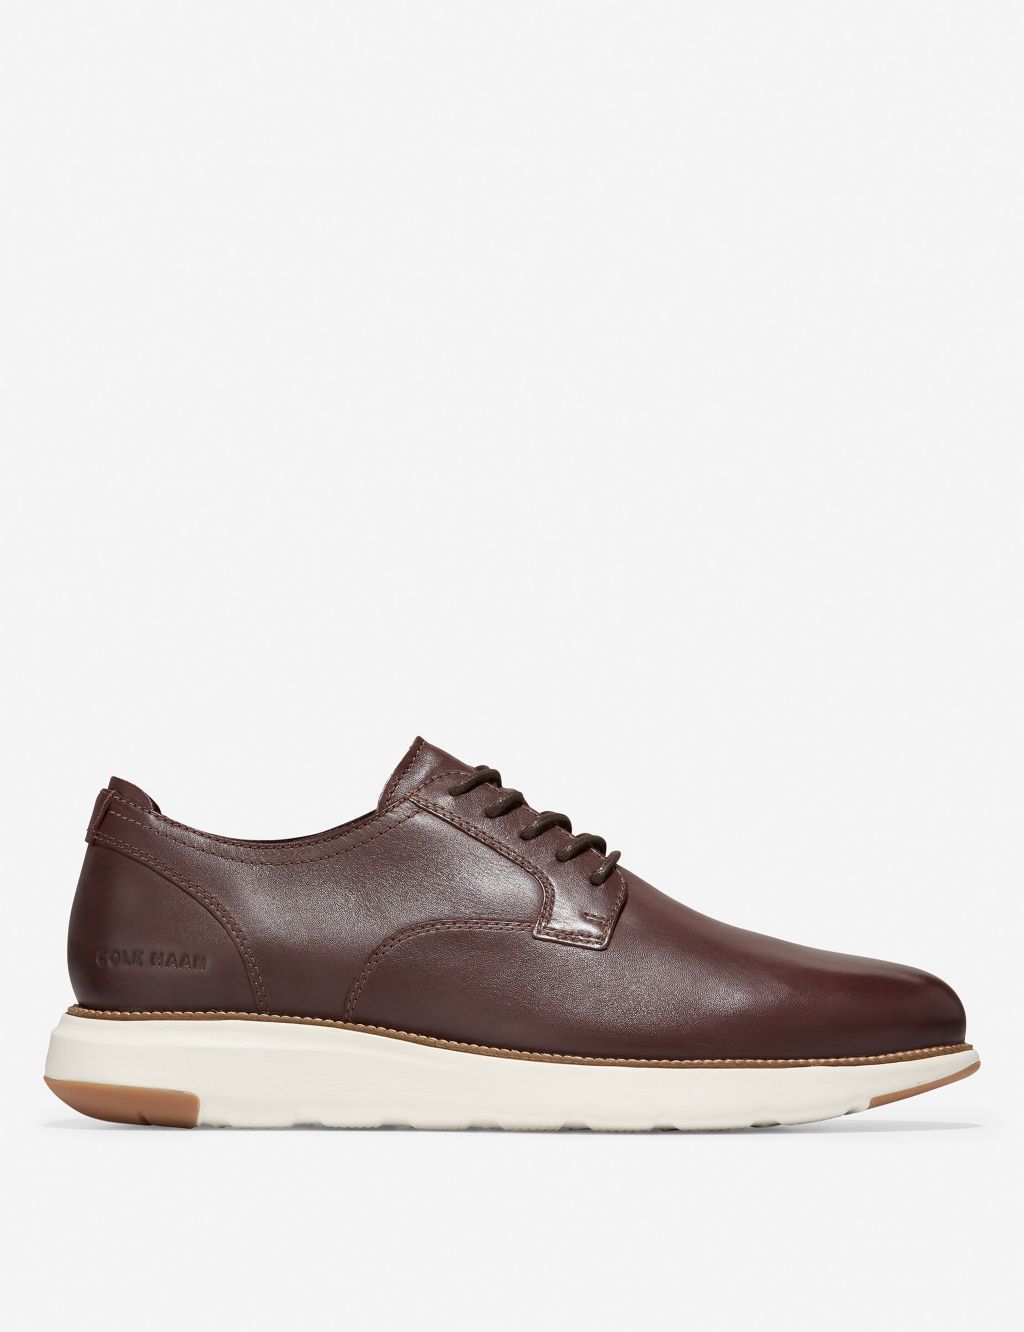 Grand Atlantic Wide Fit Leather Oxford Shoes